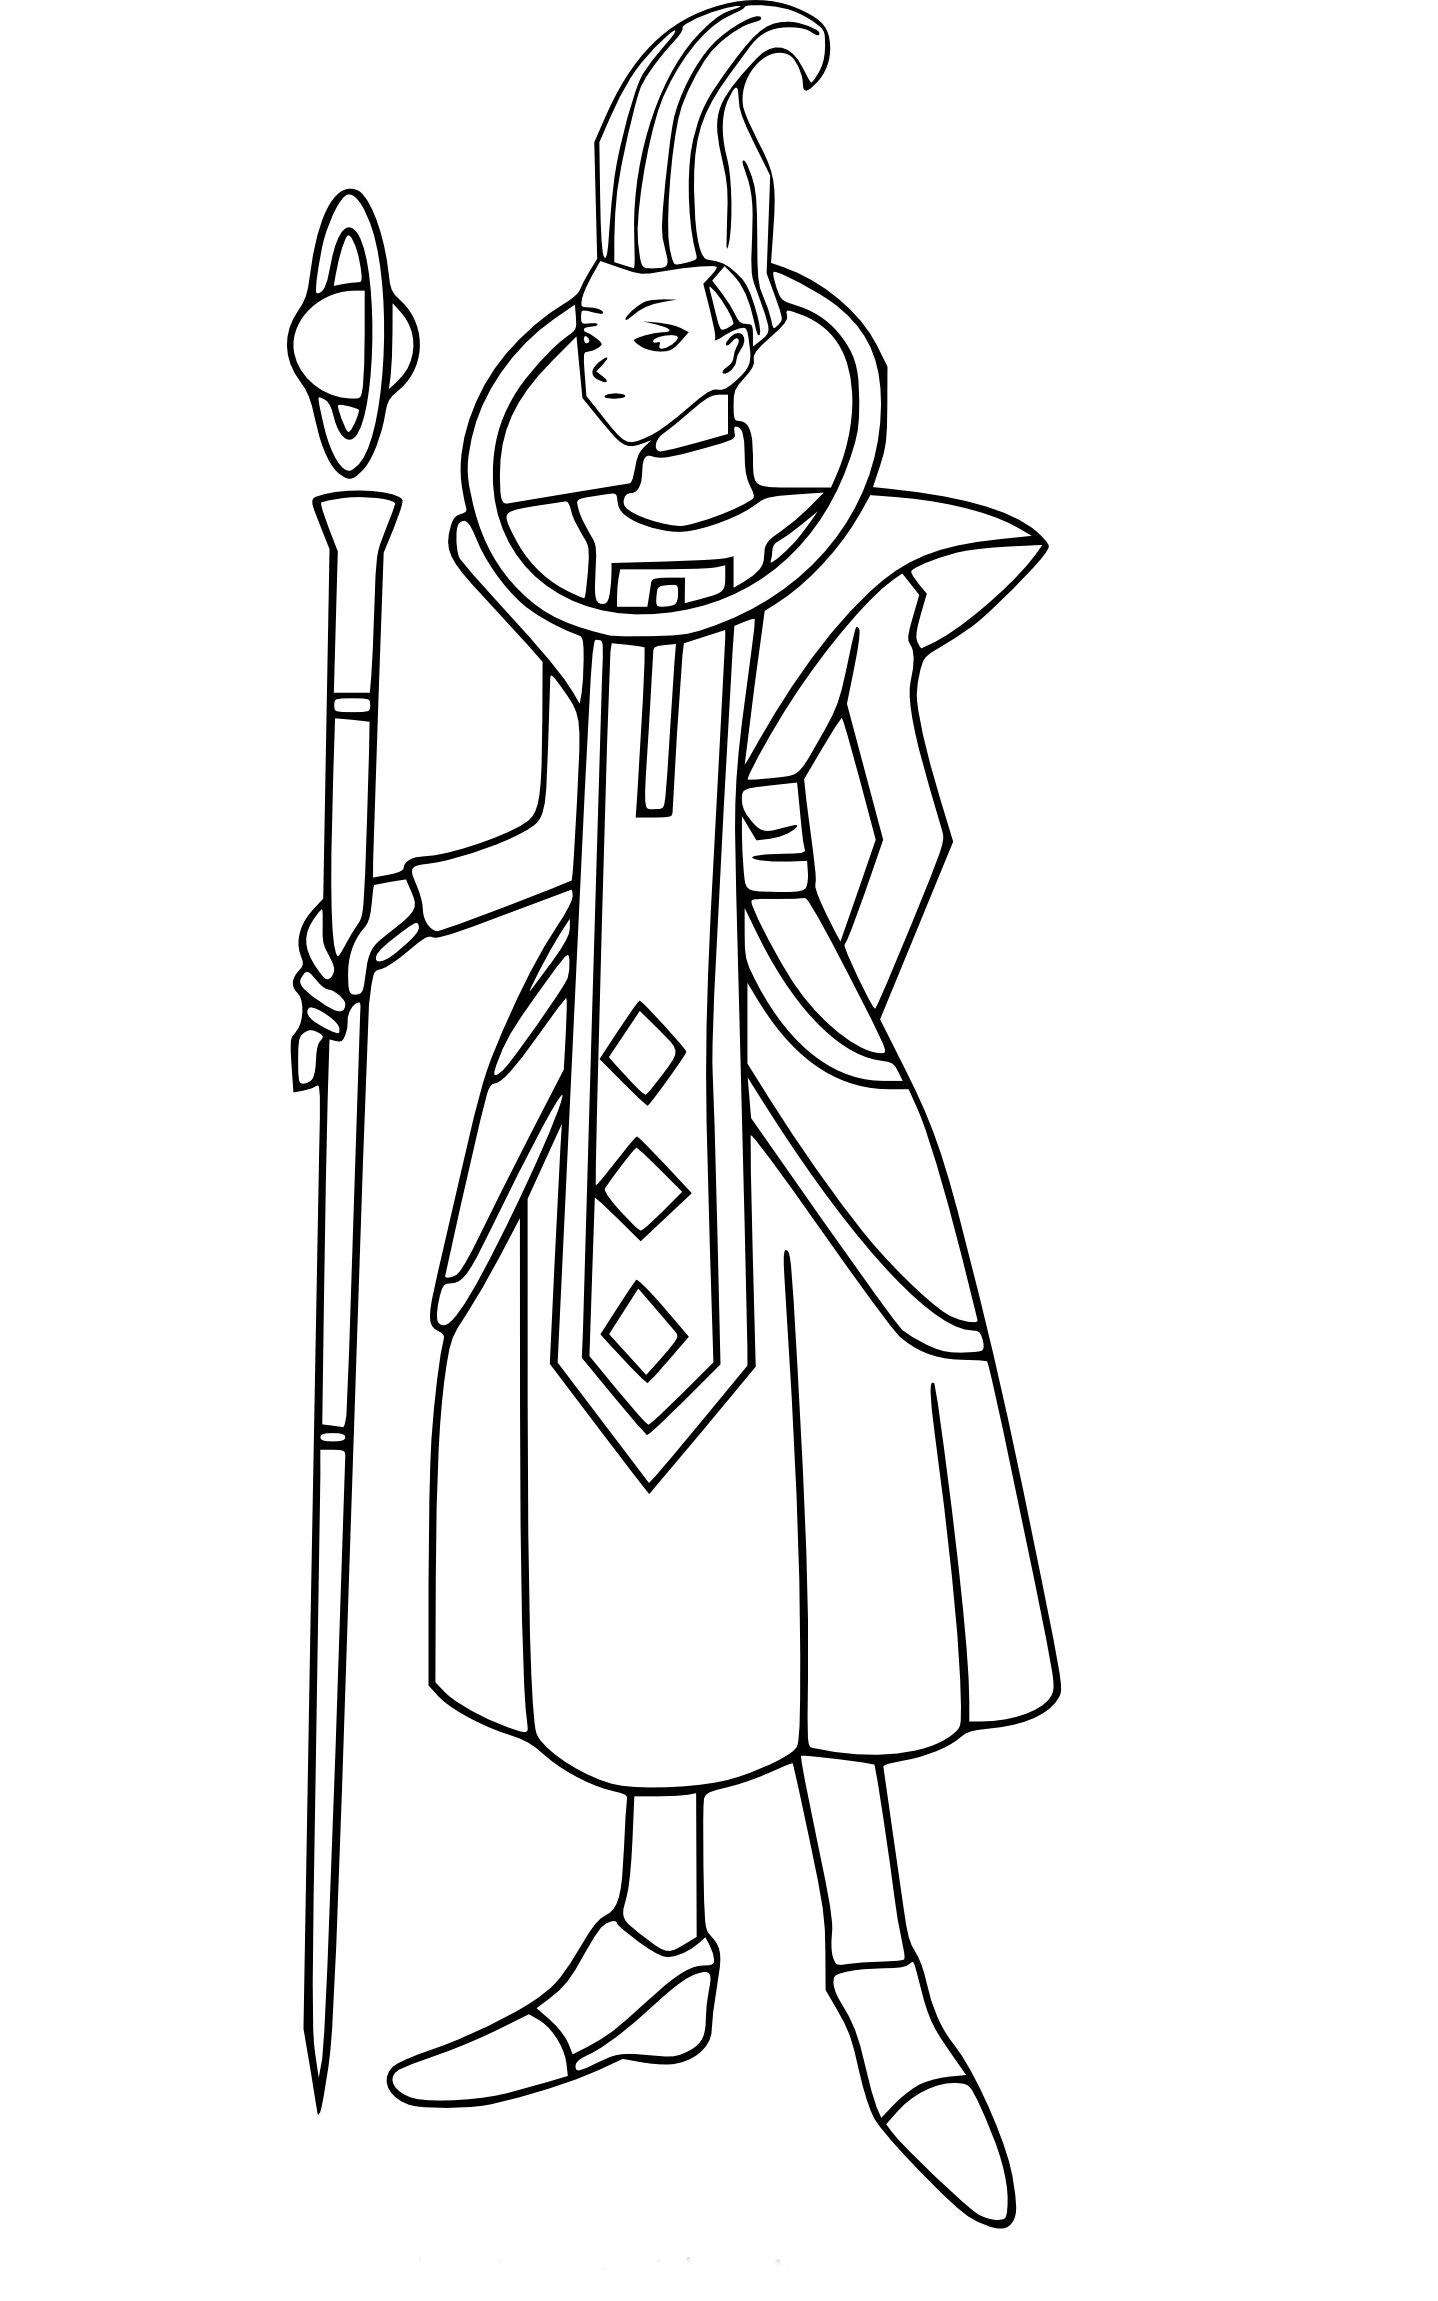 Whis Dragon Ball Z coloring page